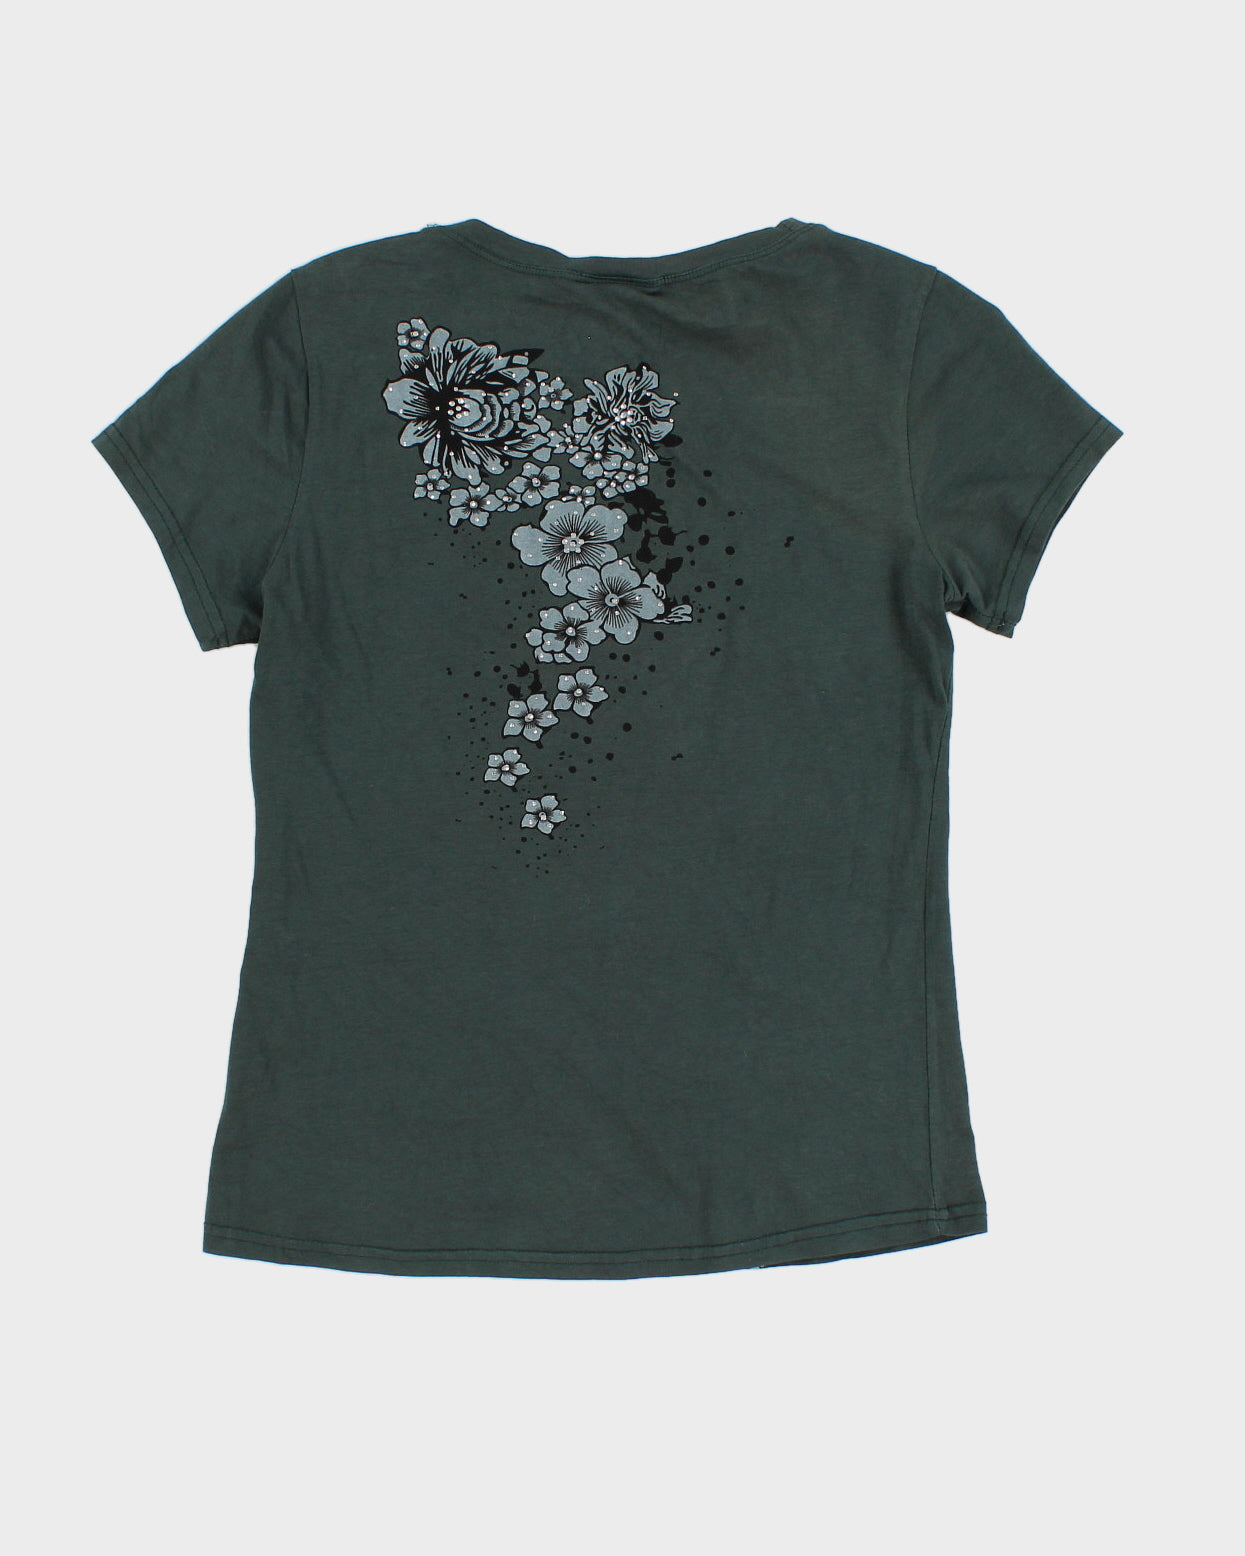 Y2K 00s Anna Sui Green Beaded Top - M